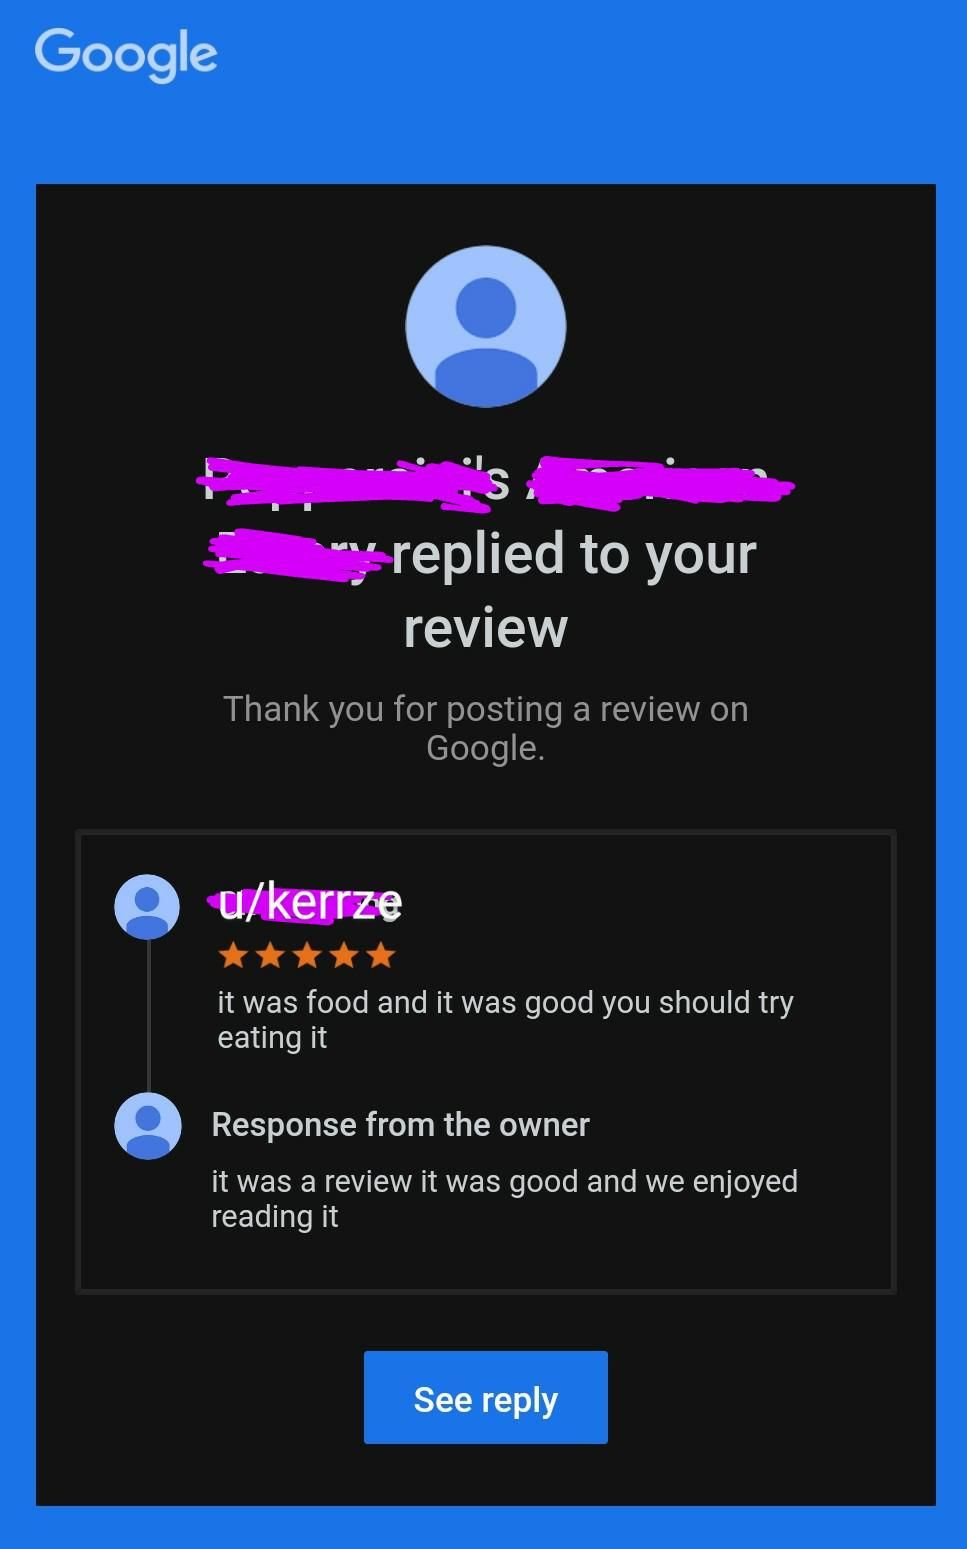 I left a Google review and the company responded the best way they could have